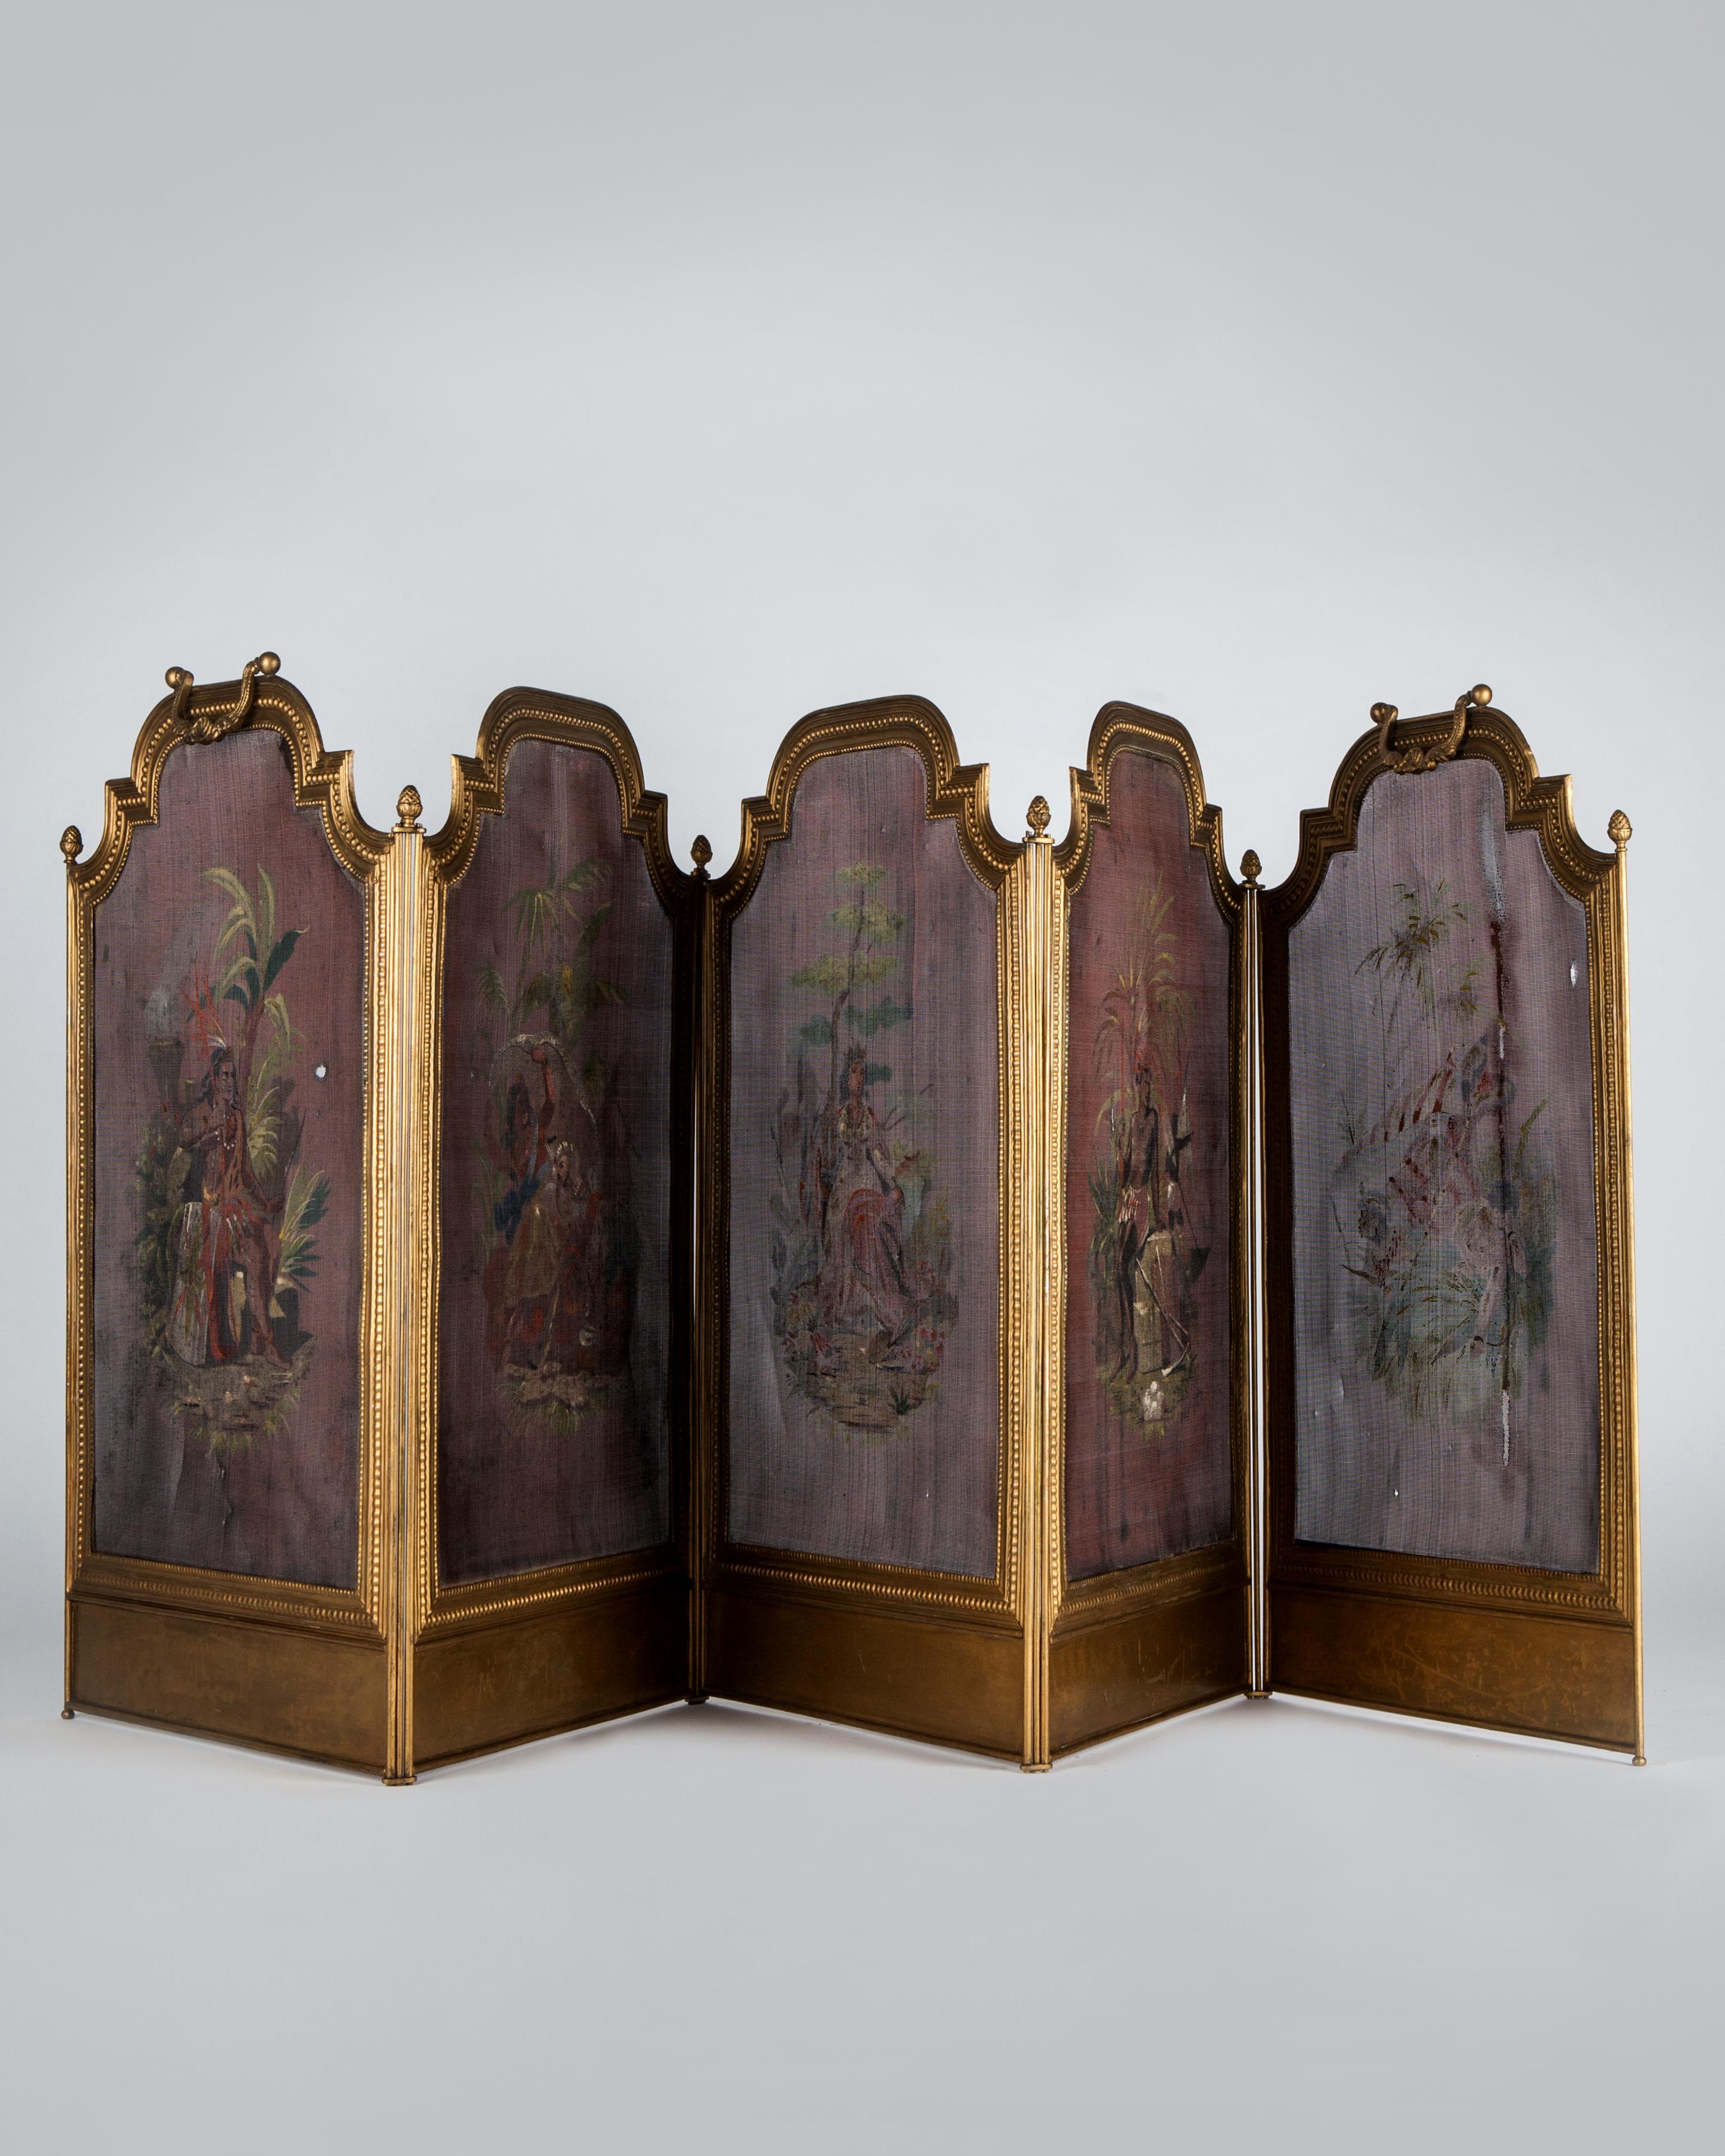 AFP0596

circa 1920.
A vintage five-panel iron fire screen with hand painted fantastical scenes of 